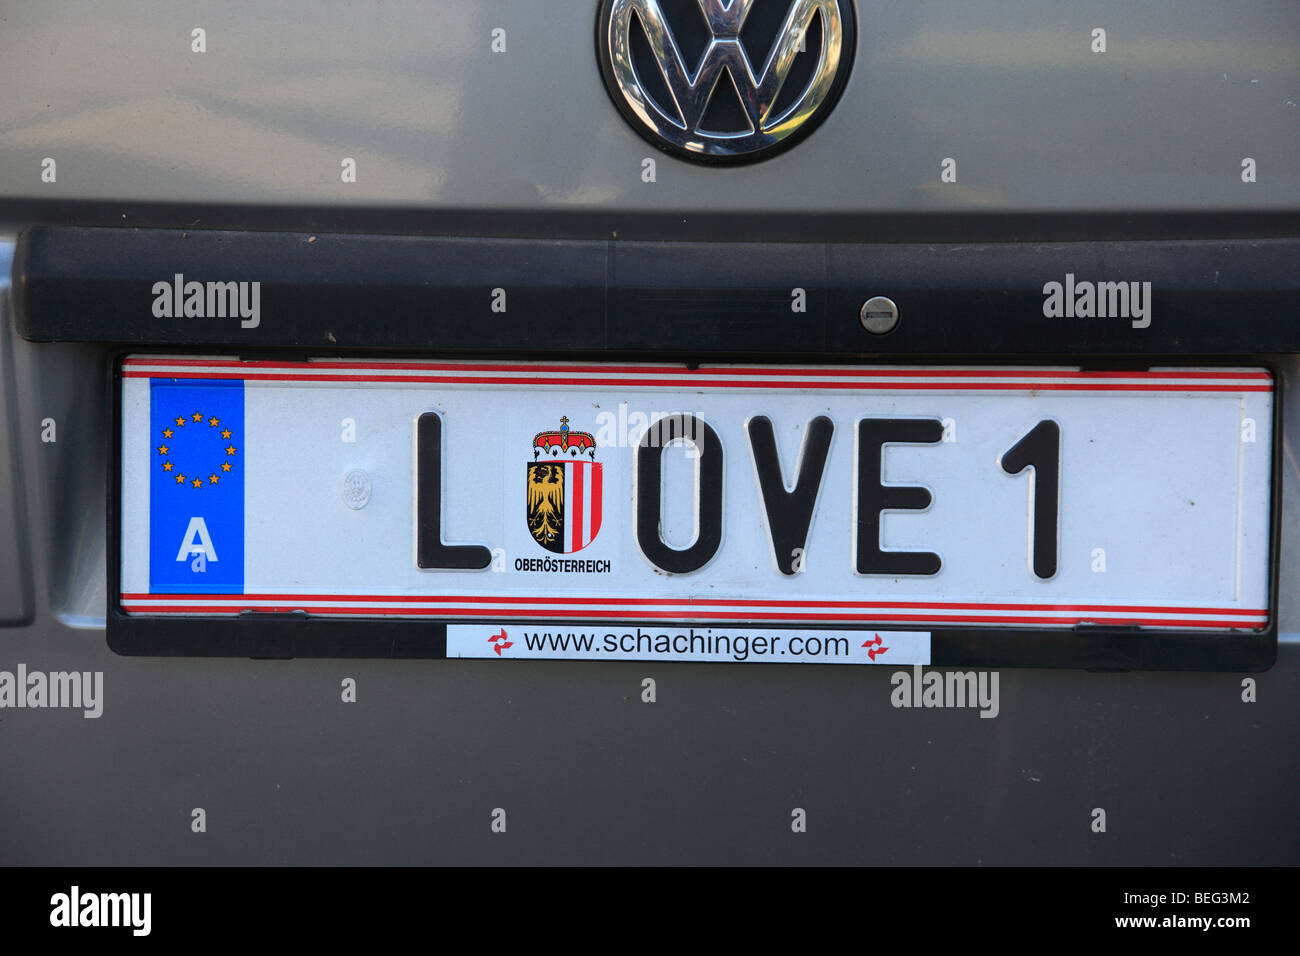 'LOVE 1' car registration plate of a Volkswagen Bus in the Austrian city Linz . Photo by Willy Matheisl Stock Photo